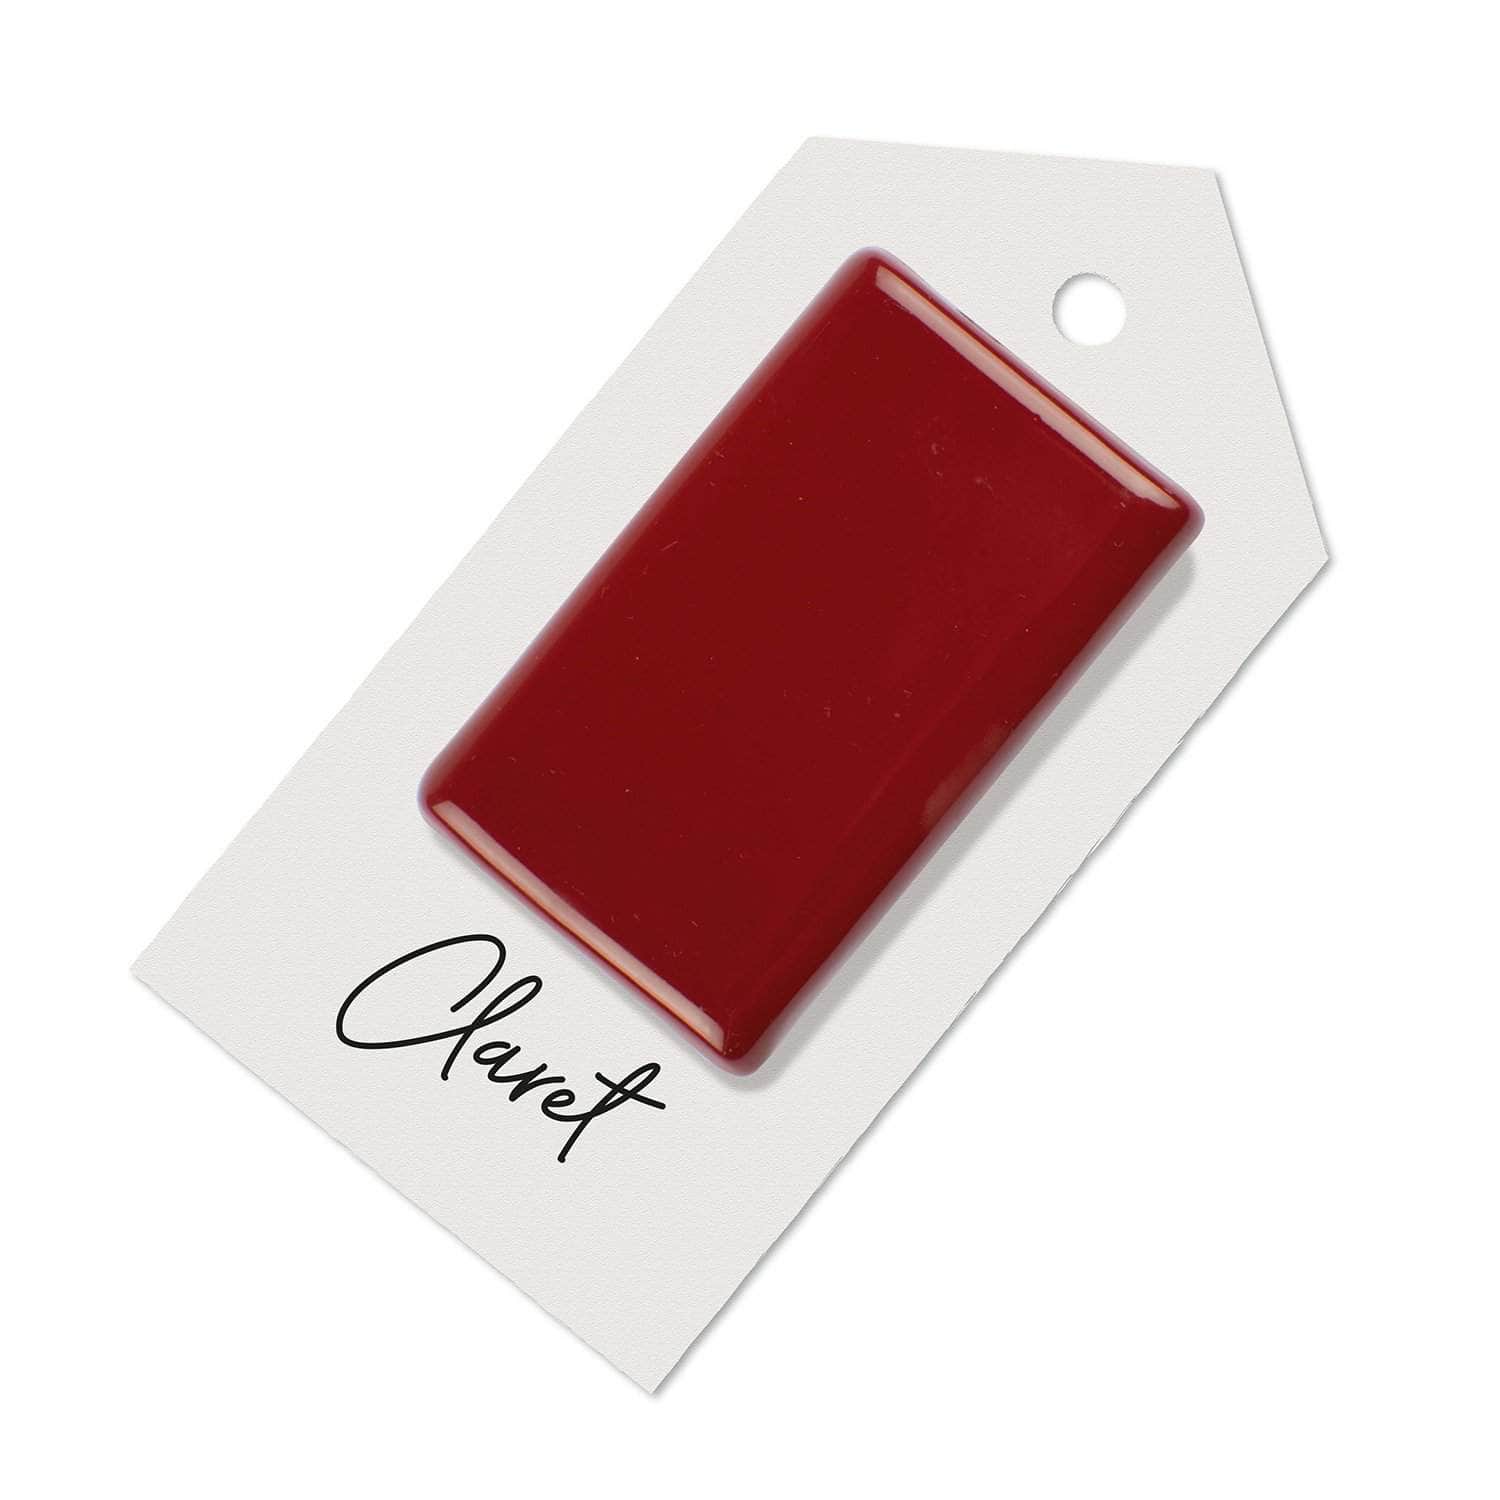 Claret sample for Aga range cooker re-enamelling & reconditioned cookers